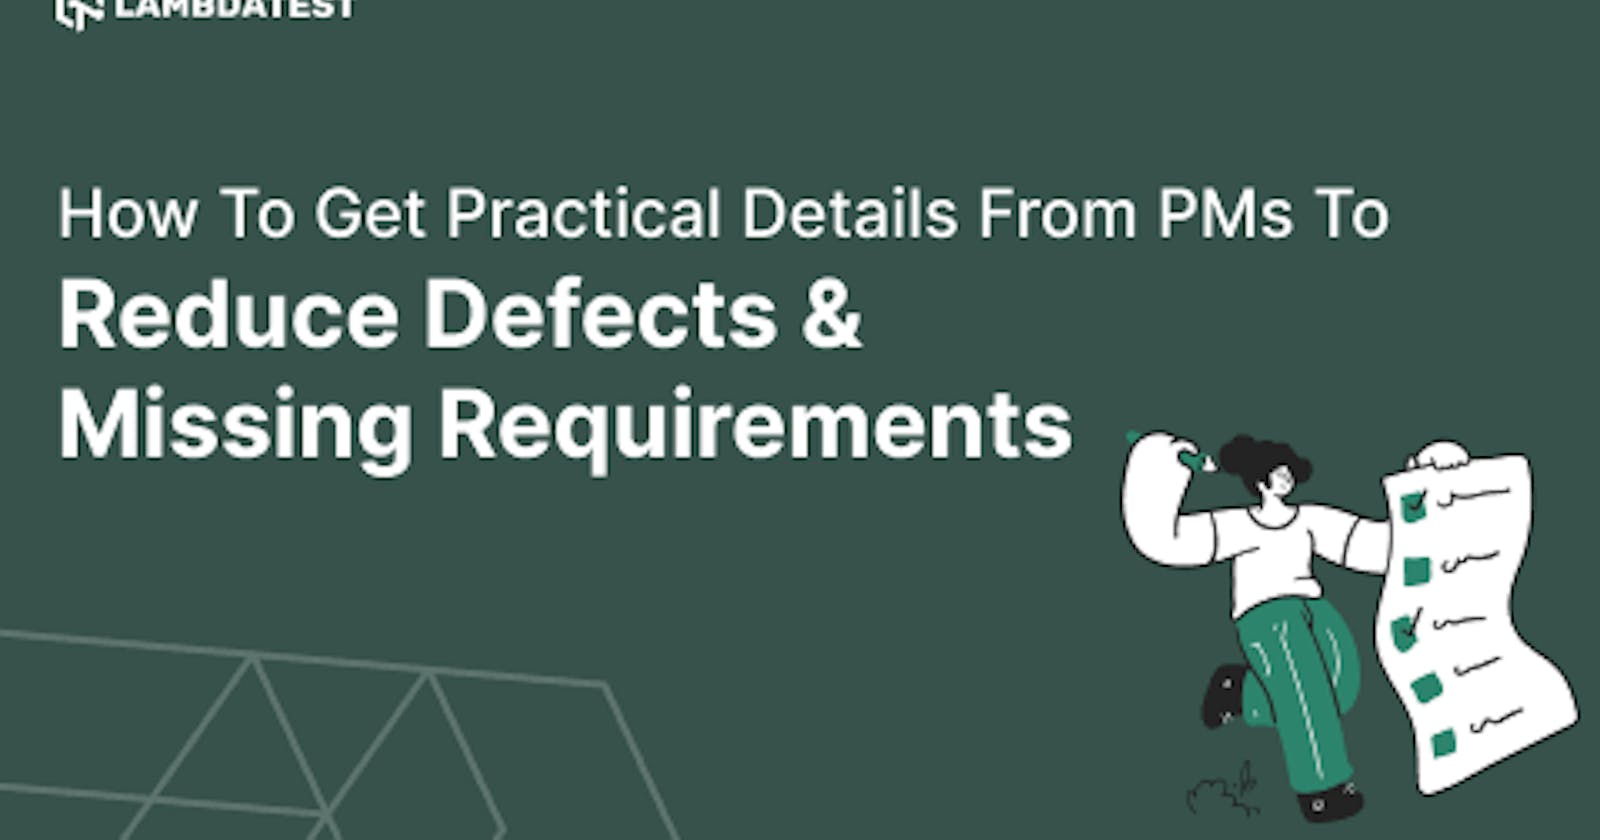 How to Get Practical Details from PMs to Reduce Defects & Missing Requirements